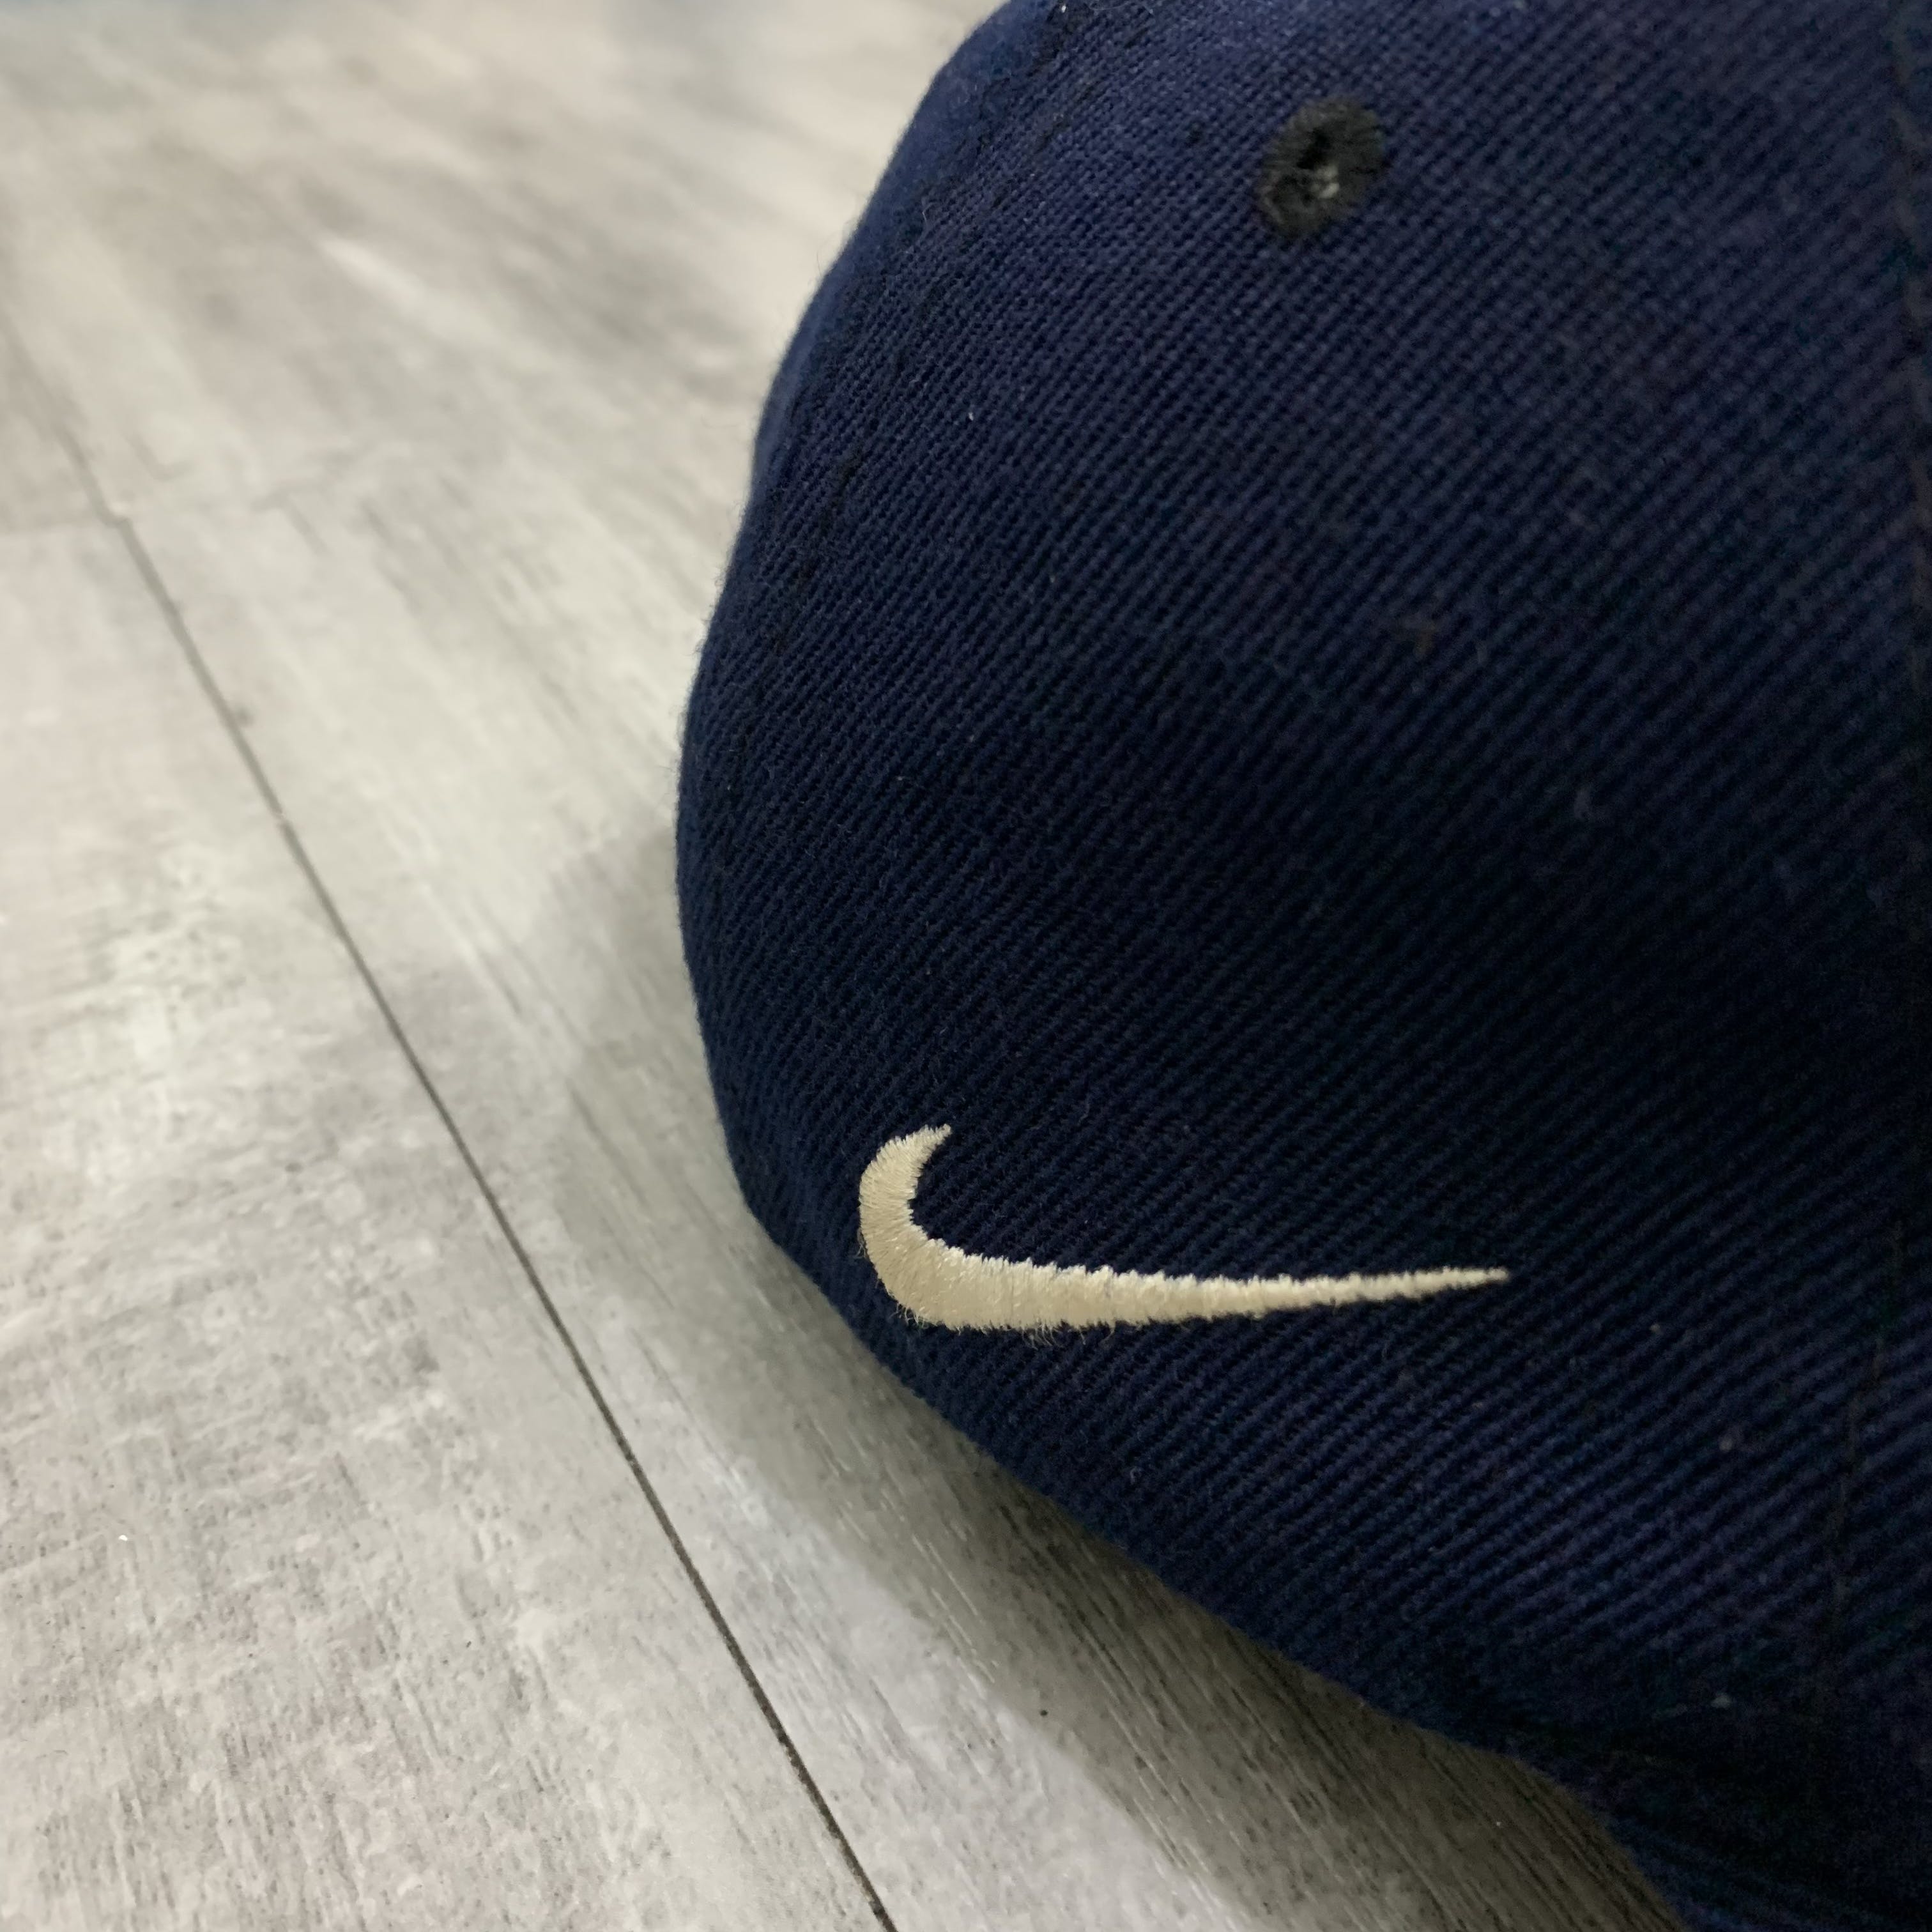 Vintage 90s Nike Embroidered Velcro Cap Hats - 4